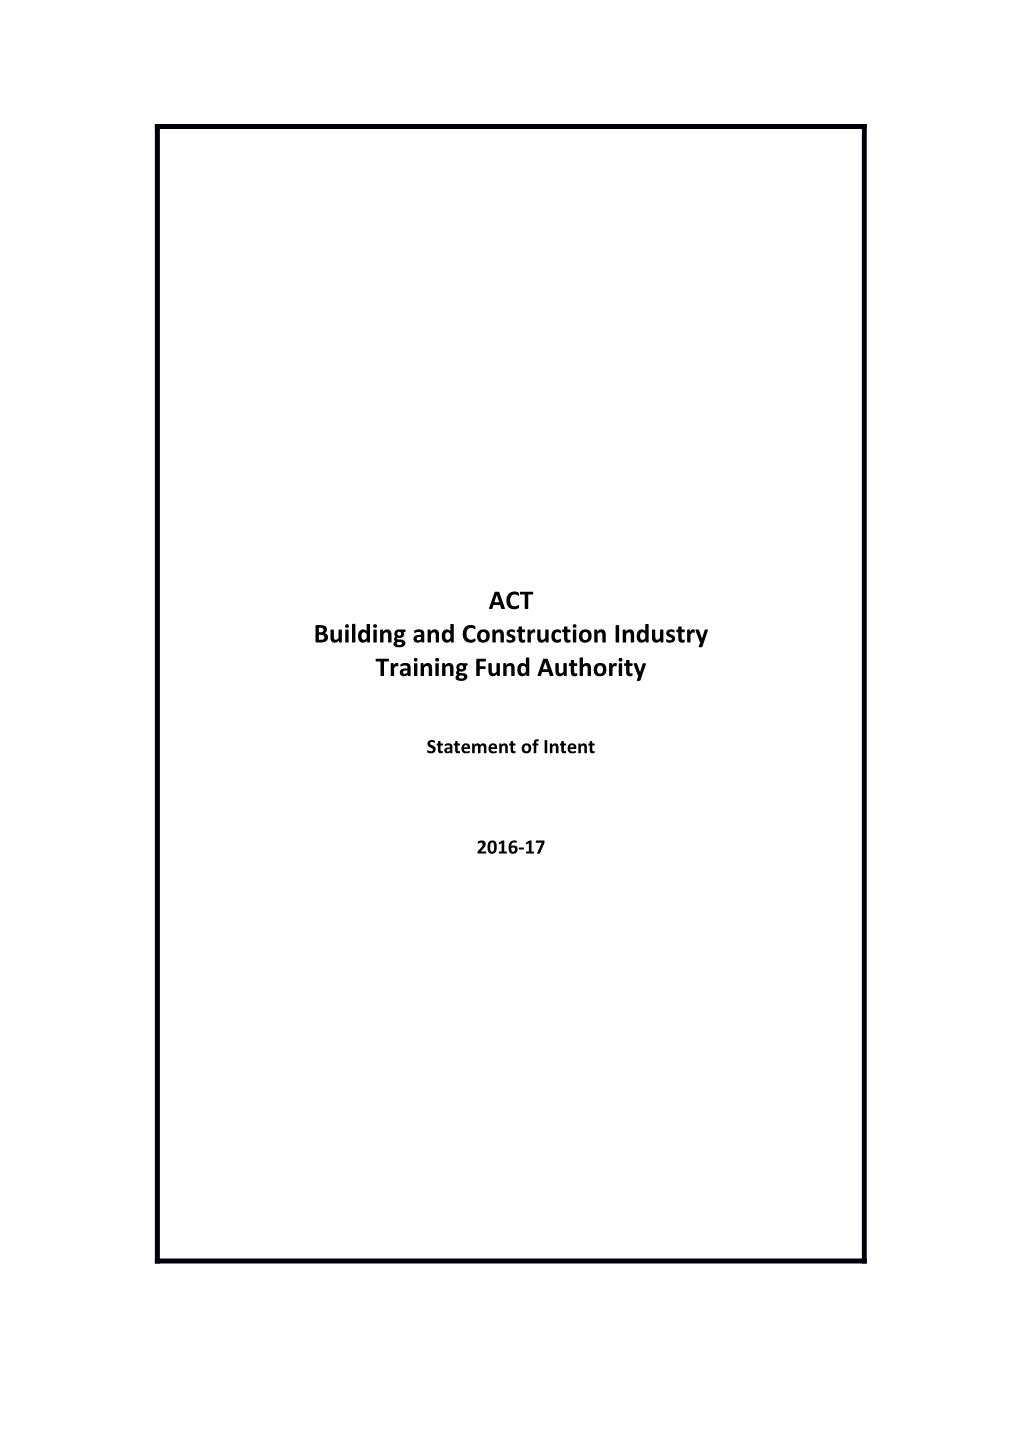 Building and Construction Industry Training Fund Authority 2016-17